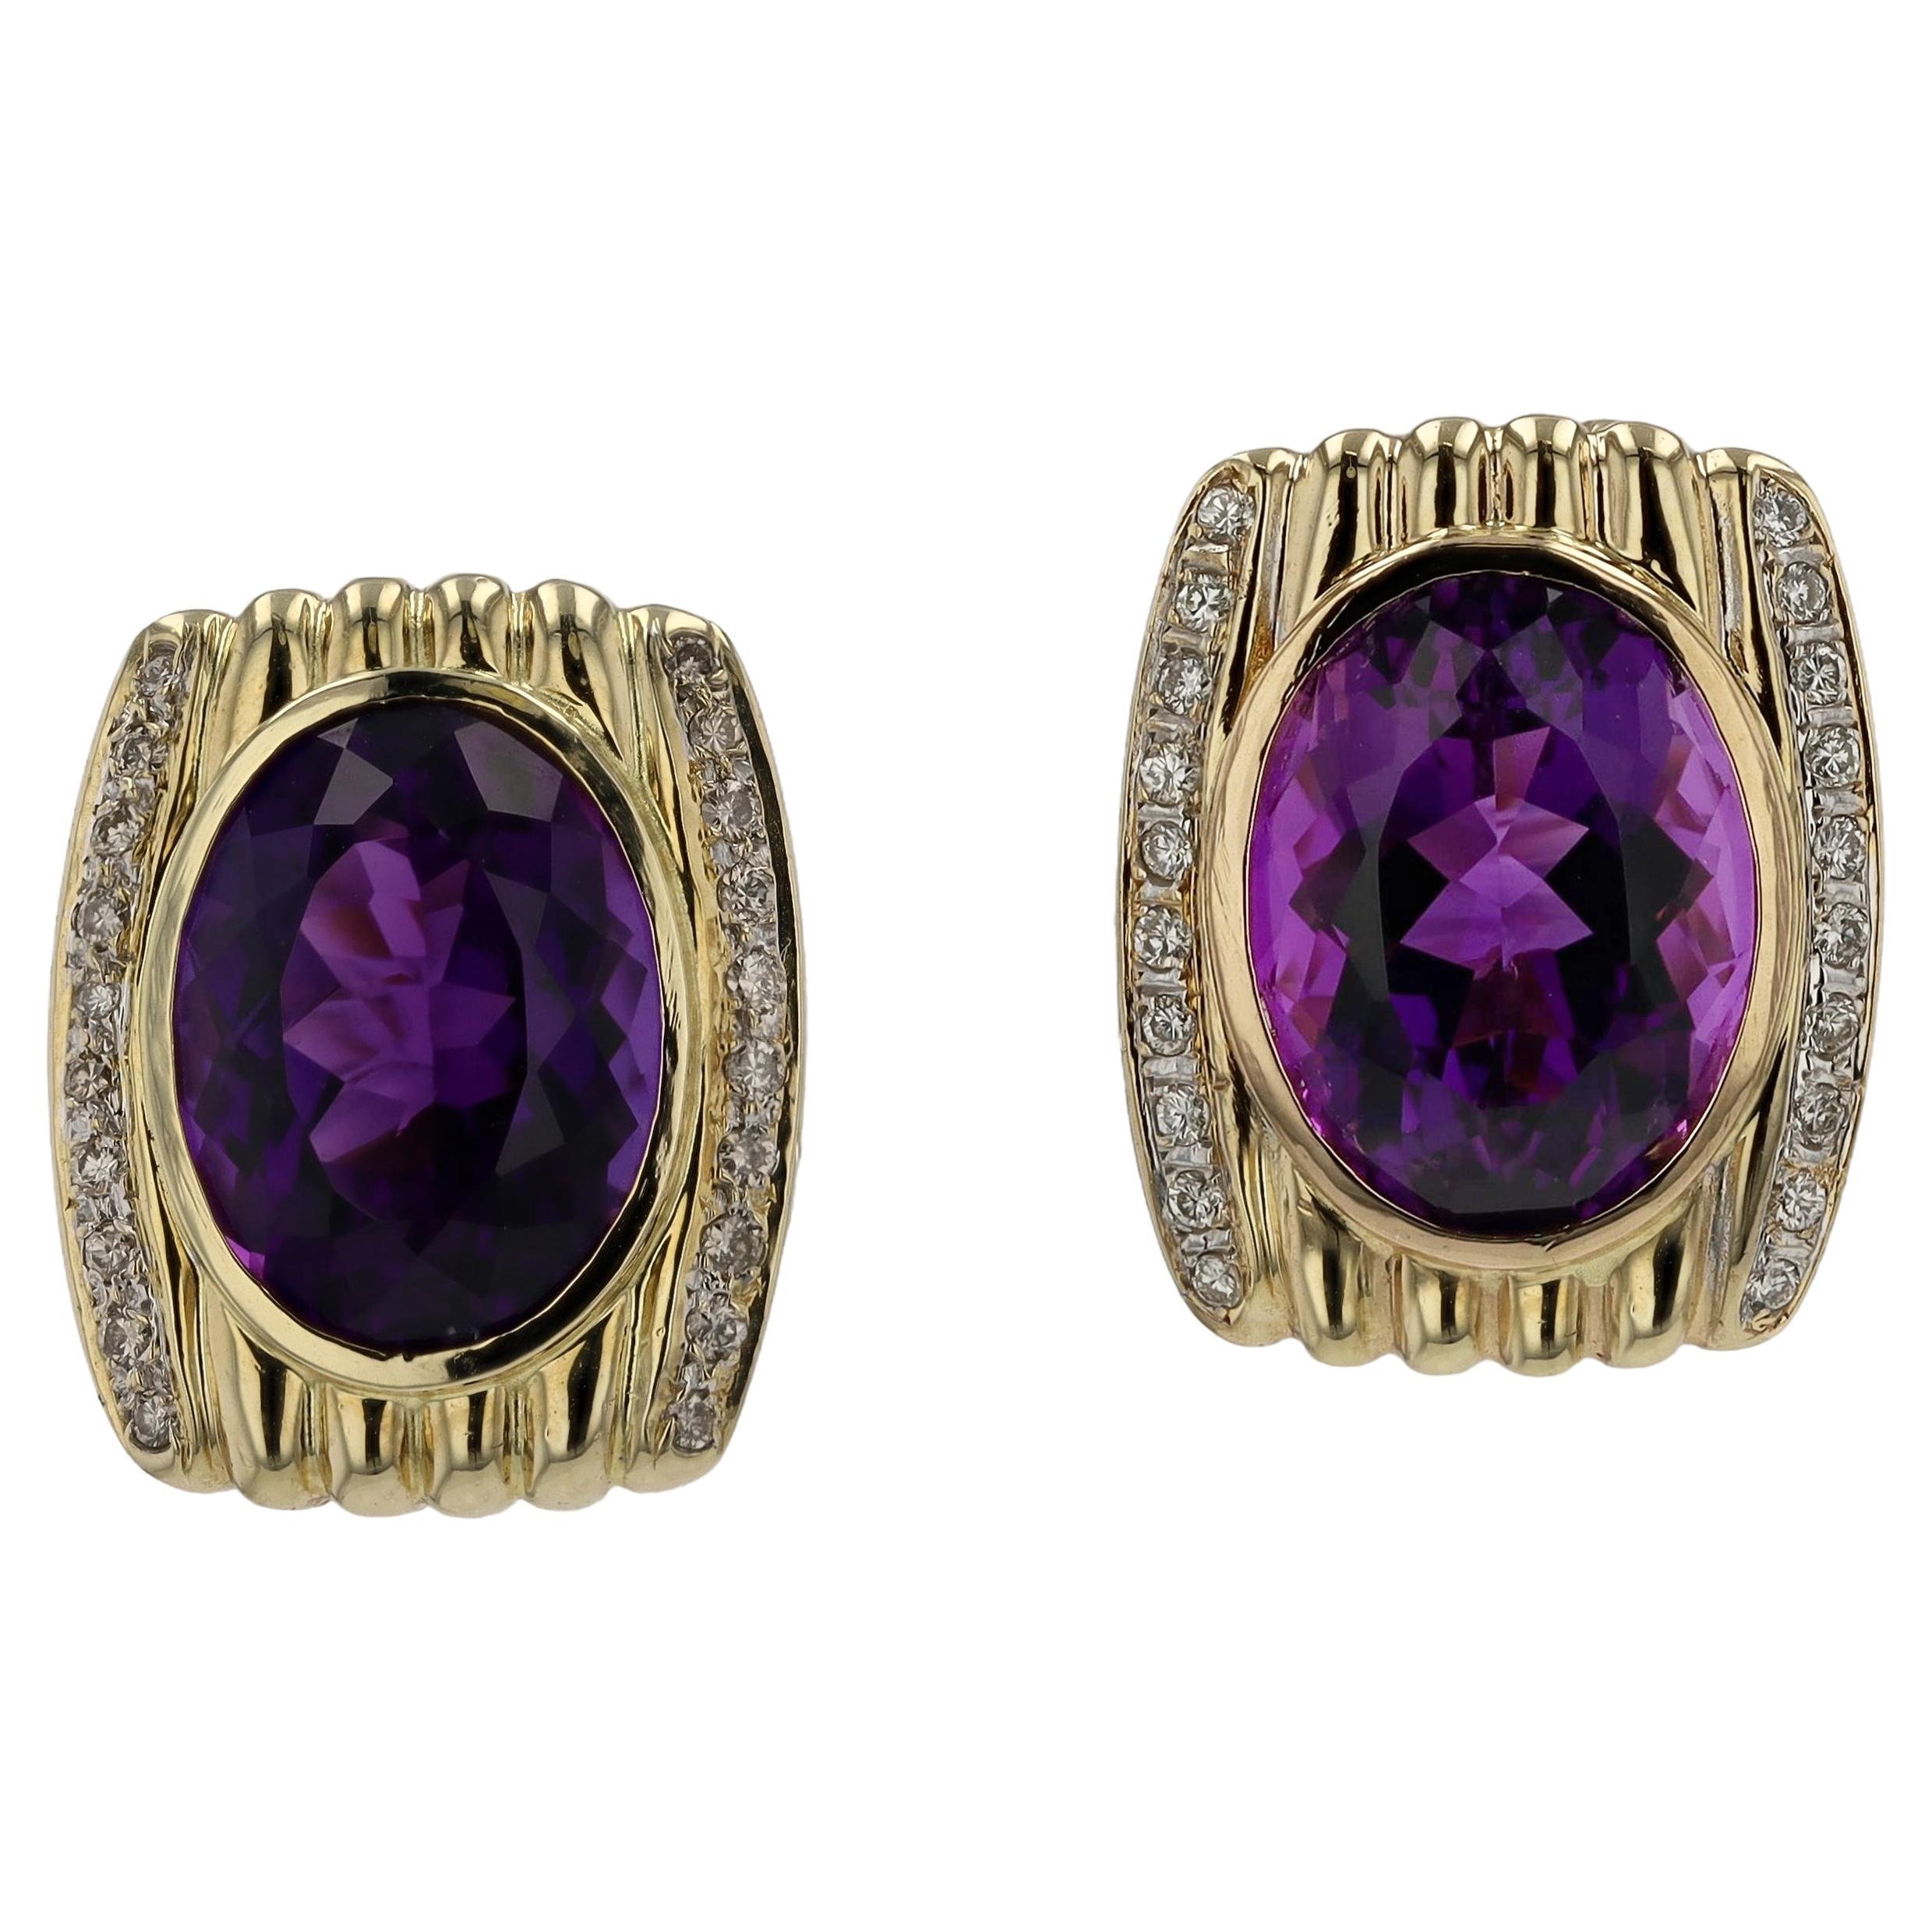 What is the rarest type of amethyst?